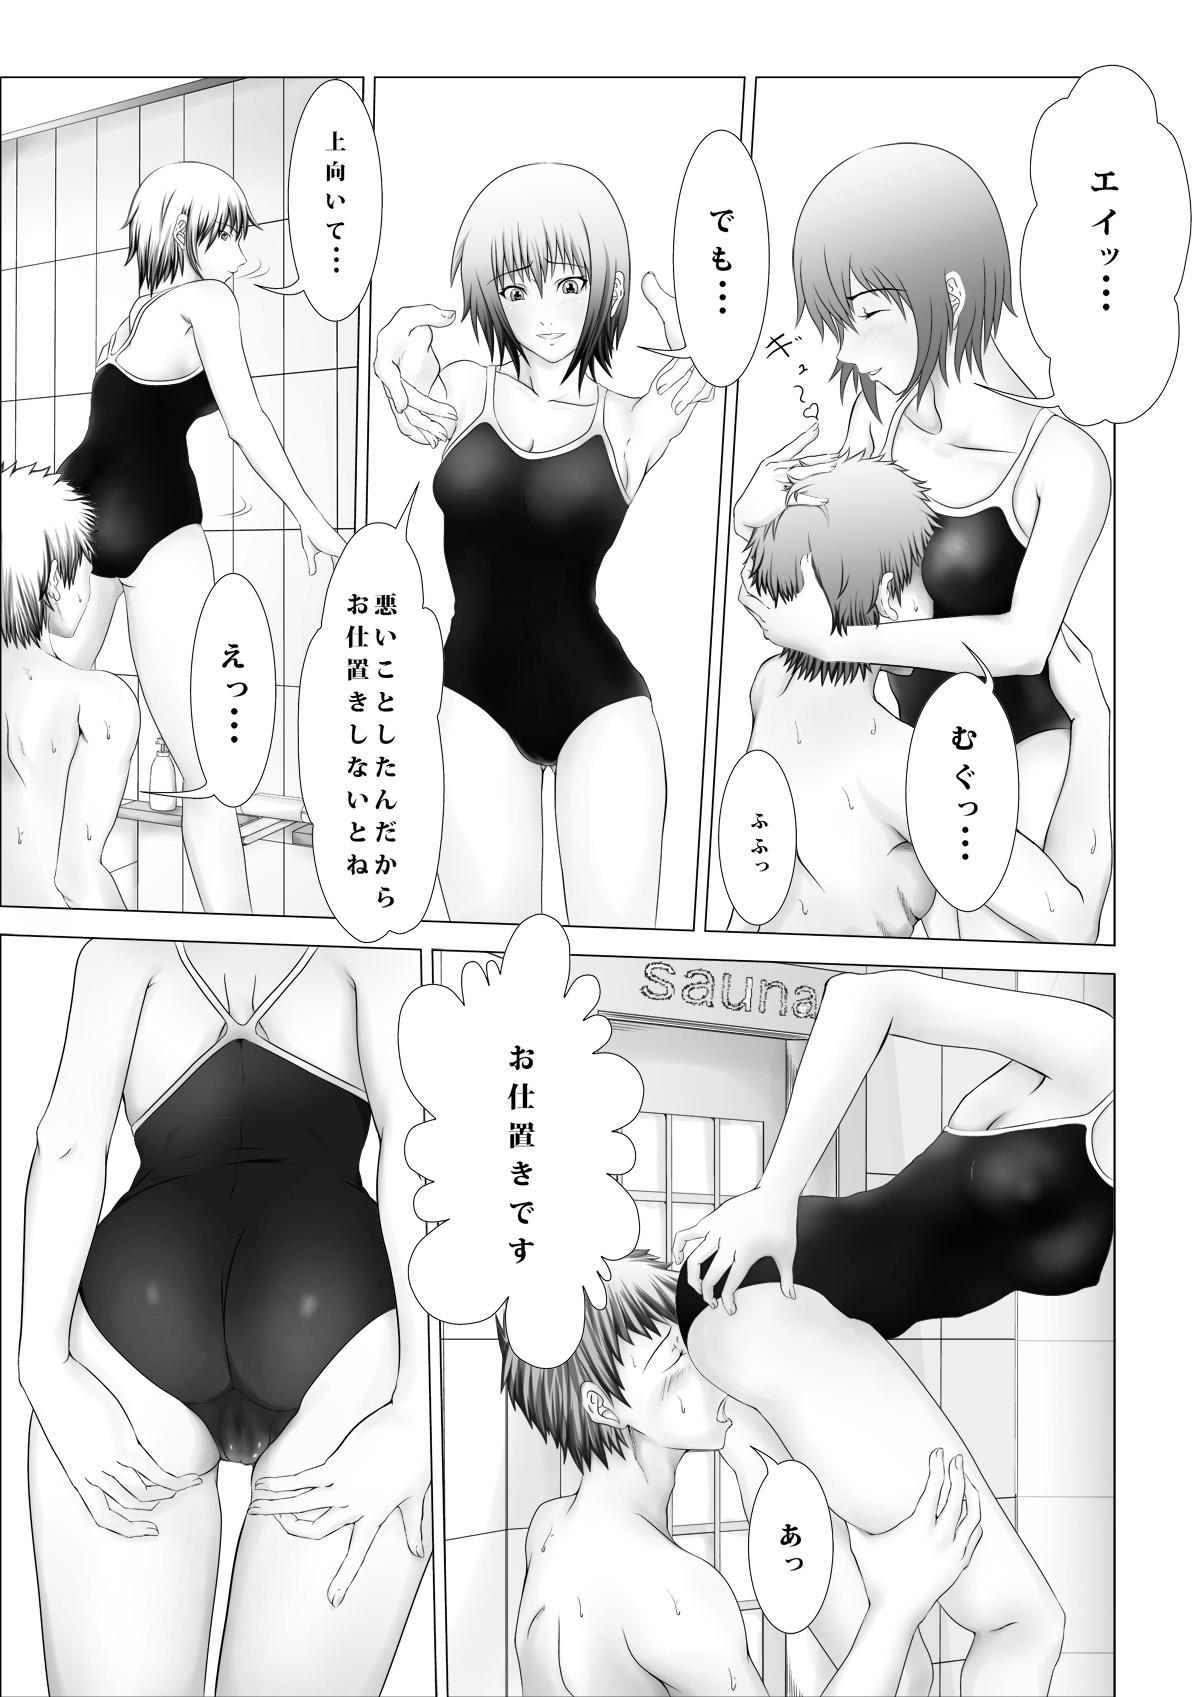 Friends 急所責めマニアックスvol.3 Natural - Page 8